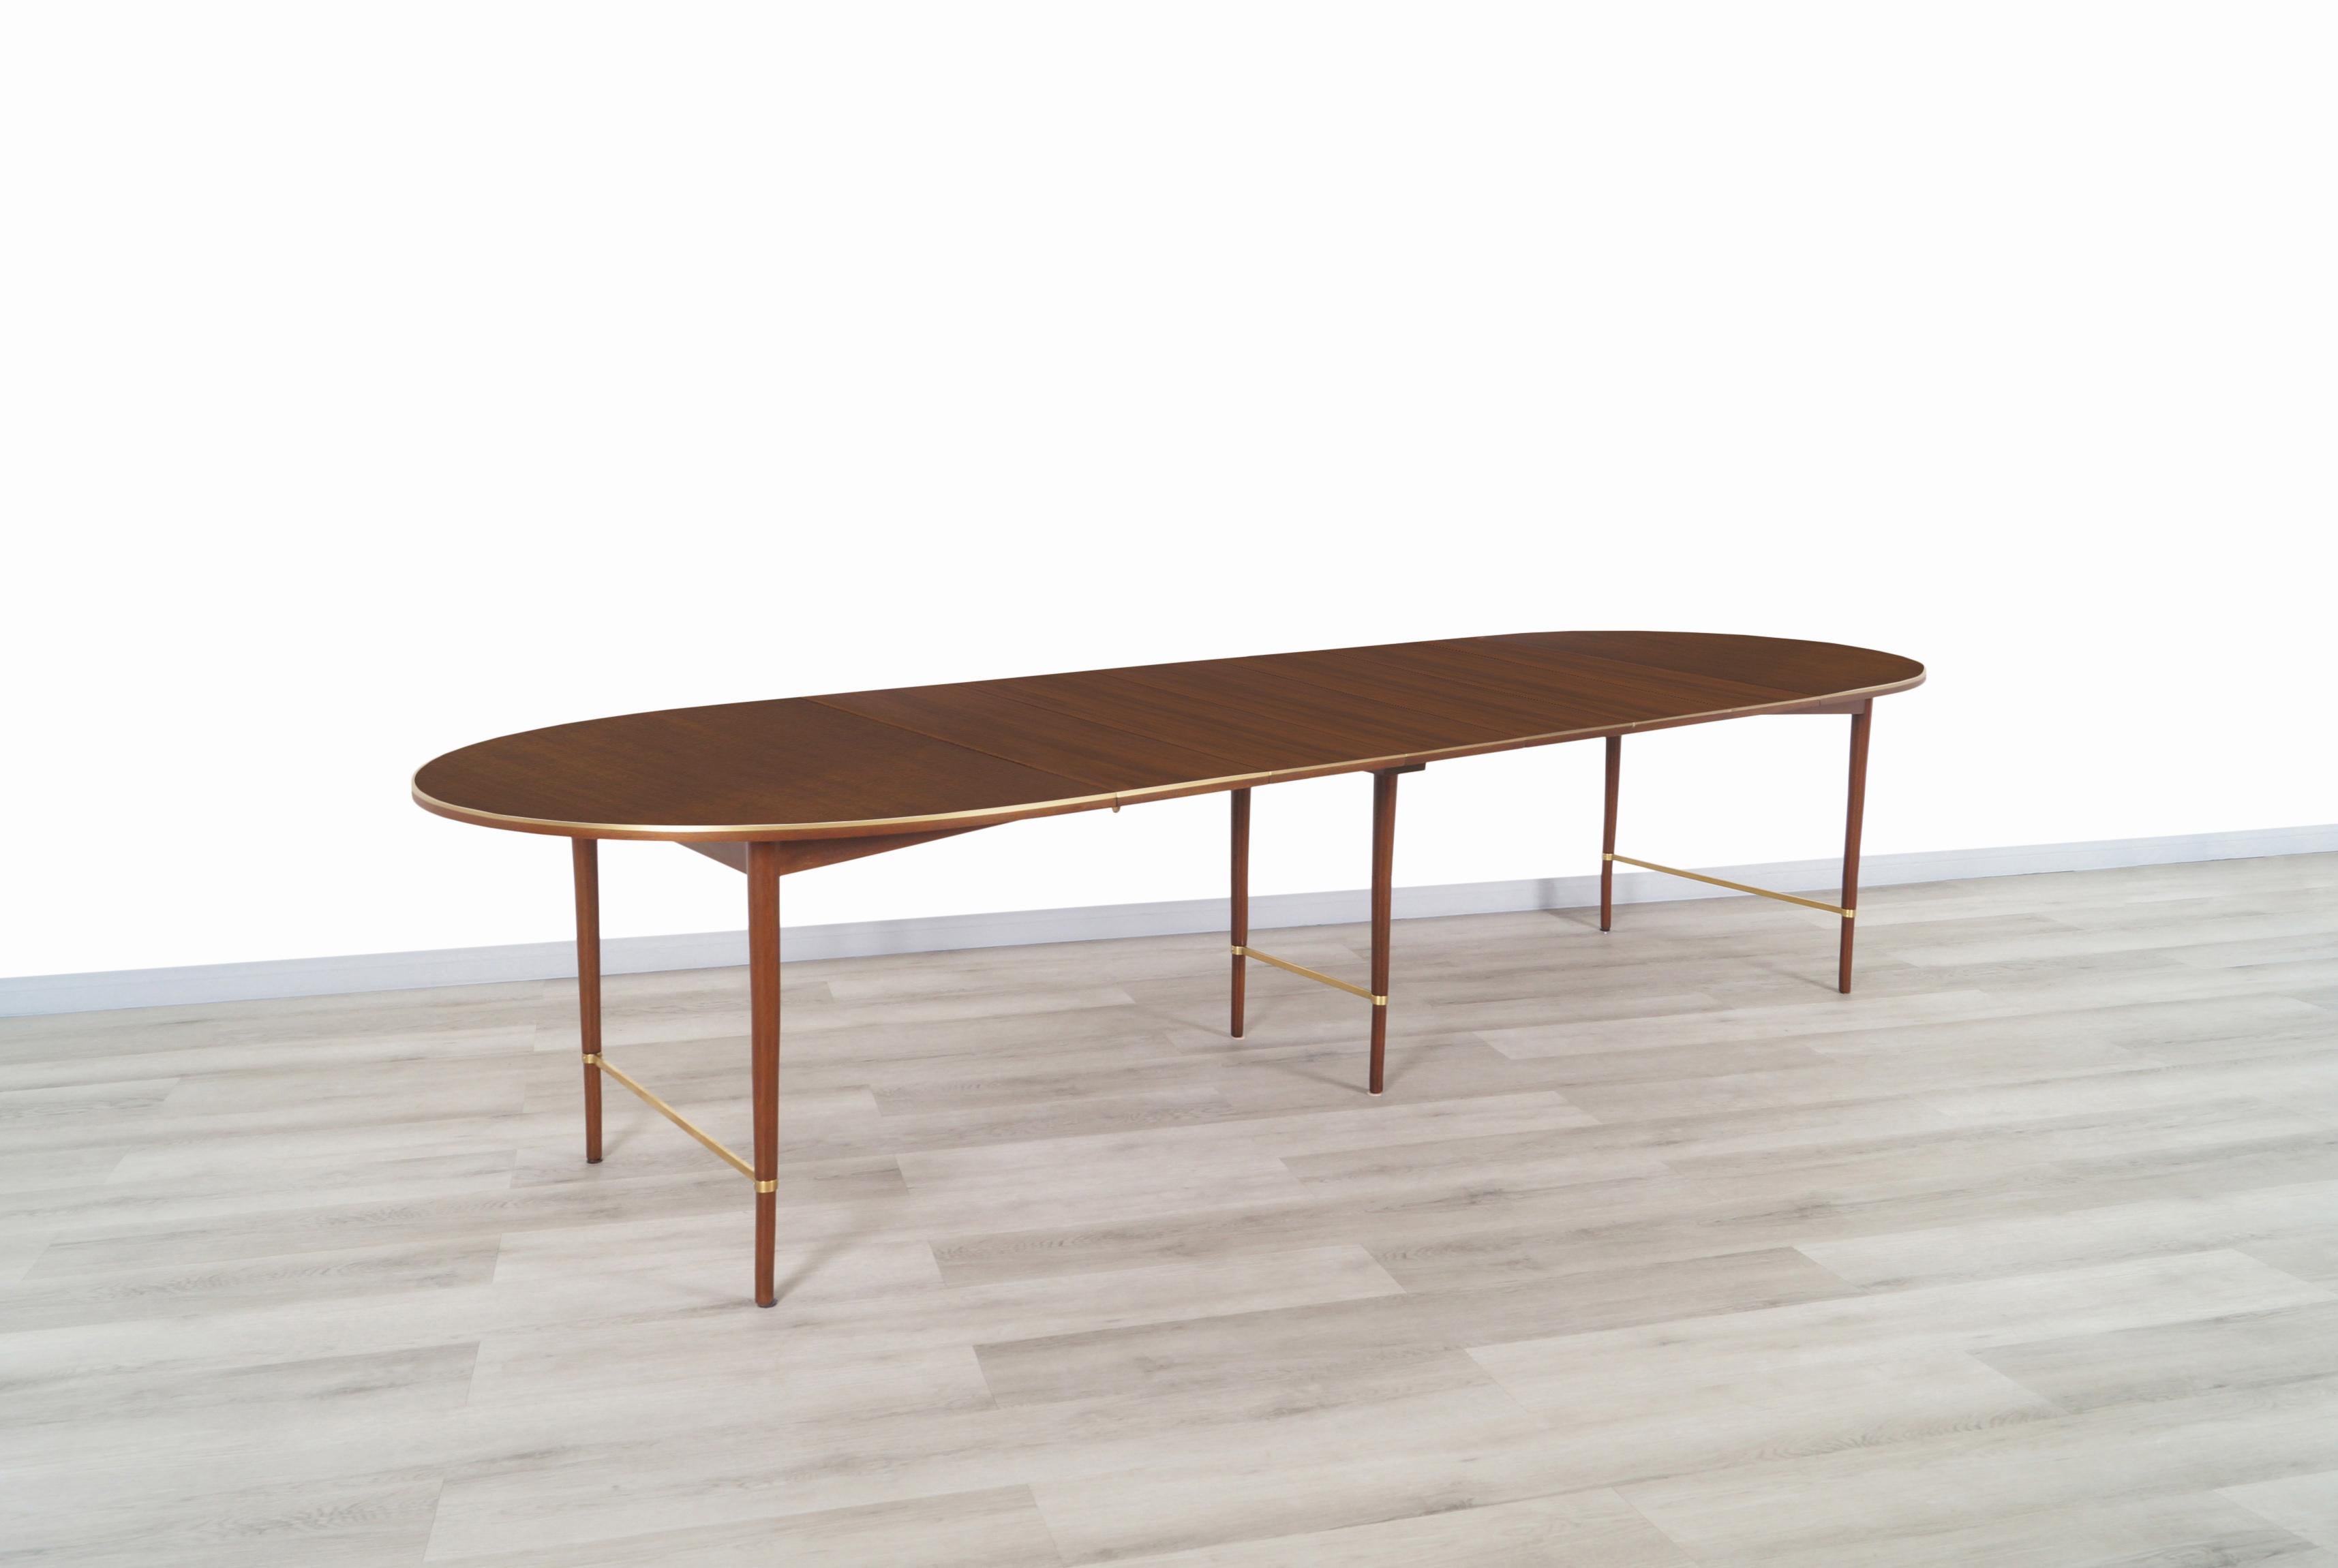 A beautiful vintage expanding dining table designed by Paul McCobb for H. Sacks & Son as part of the Connoisseur Collection. An excellent design that shows the quality craftsmanship of Paul McCobb. This table features an oval walnut top with lovely